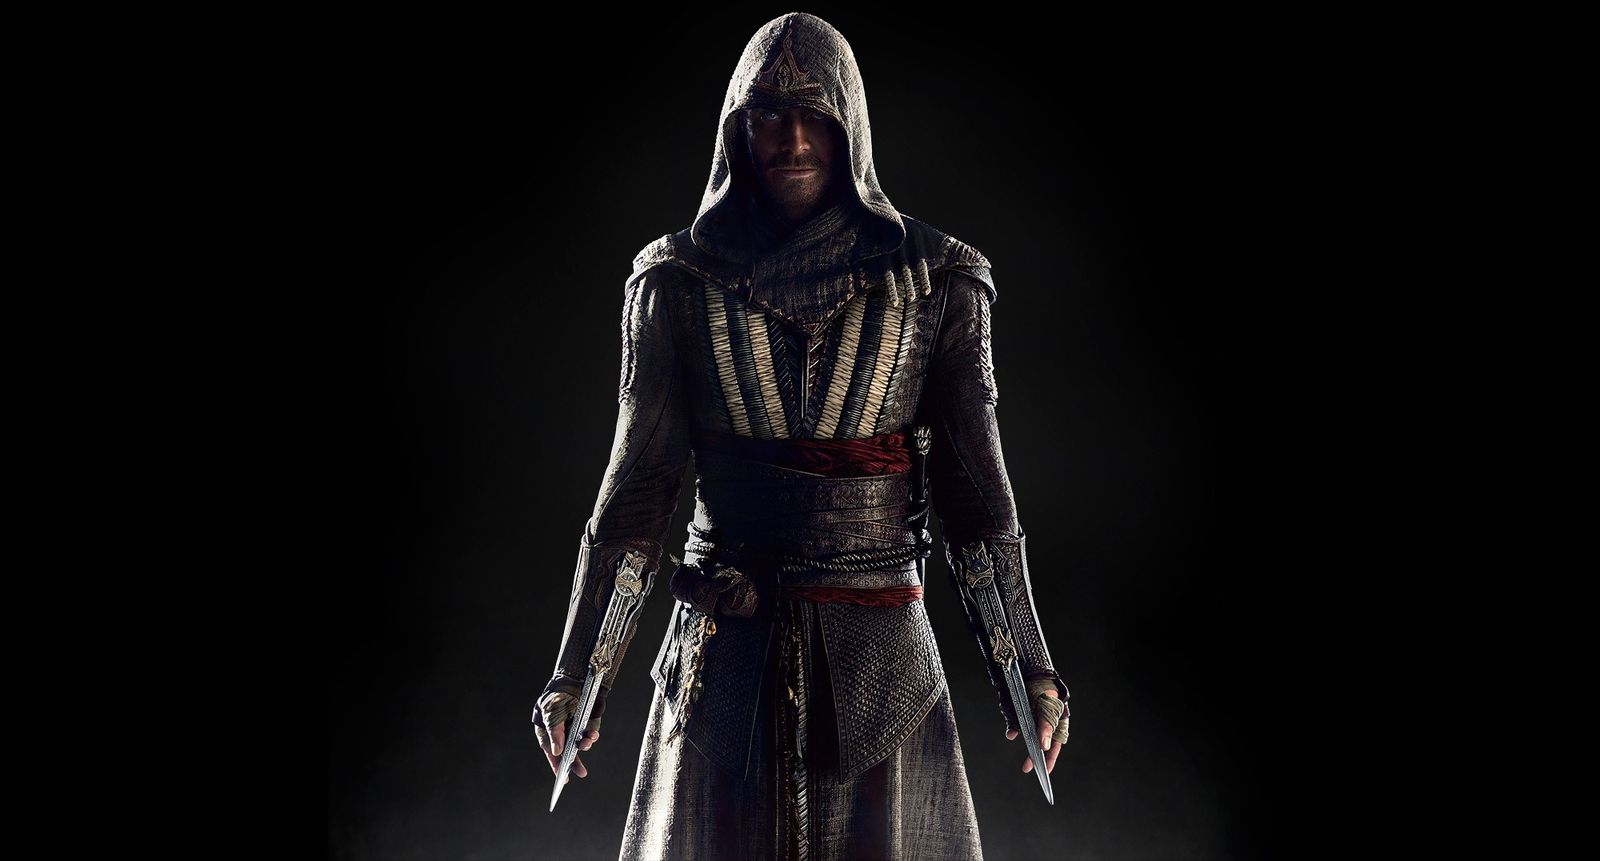 New Assassin’s Creed Trailer Released